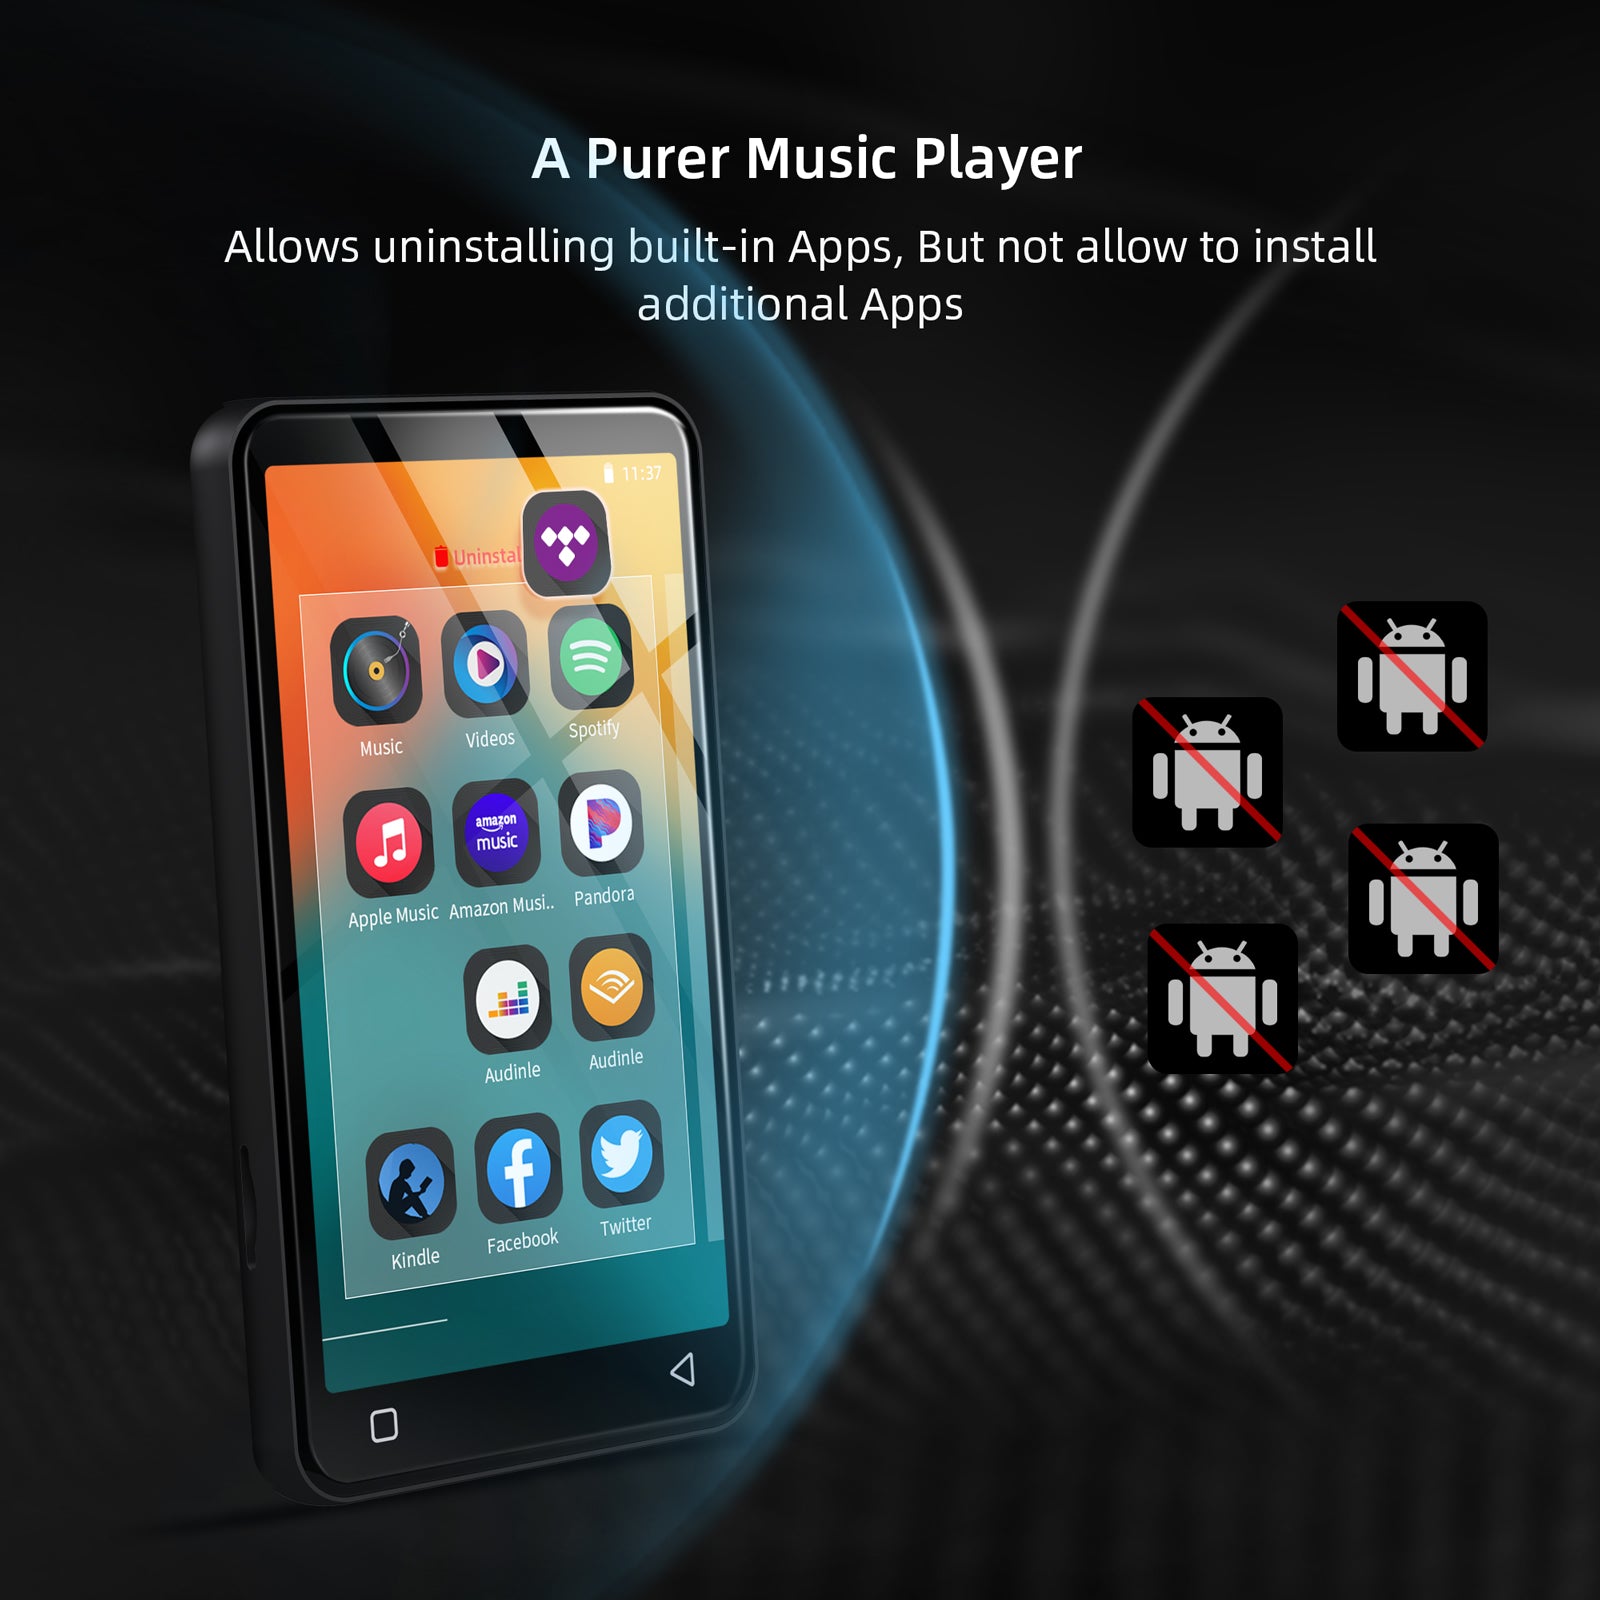 MP3 Player with Bluetooth and WiFi, 4" Full Touch Screen MP4 MP3 Player with Spotify, Android Streaming Music Player with Pandora, Portable HiFi Sound Walkman Digital Audio Player with Speaker